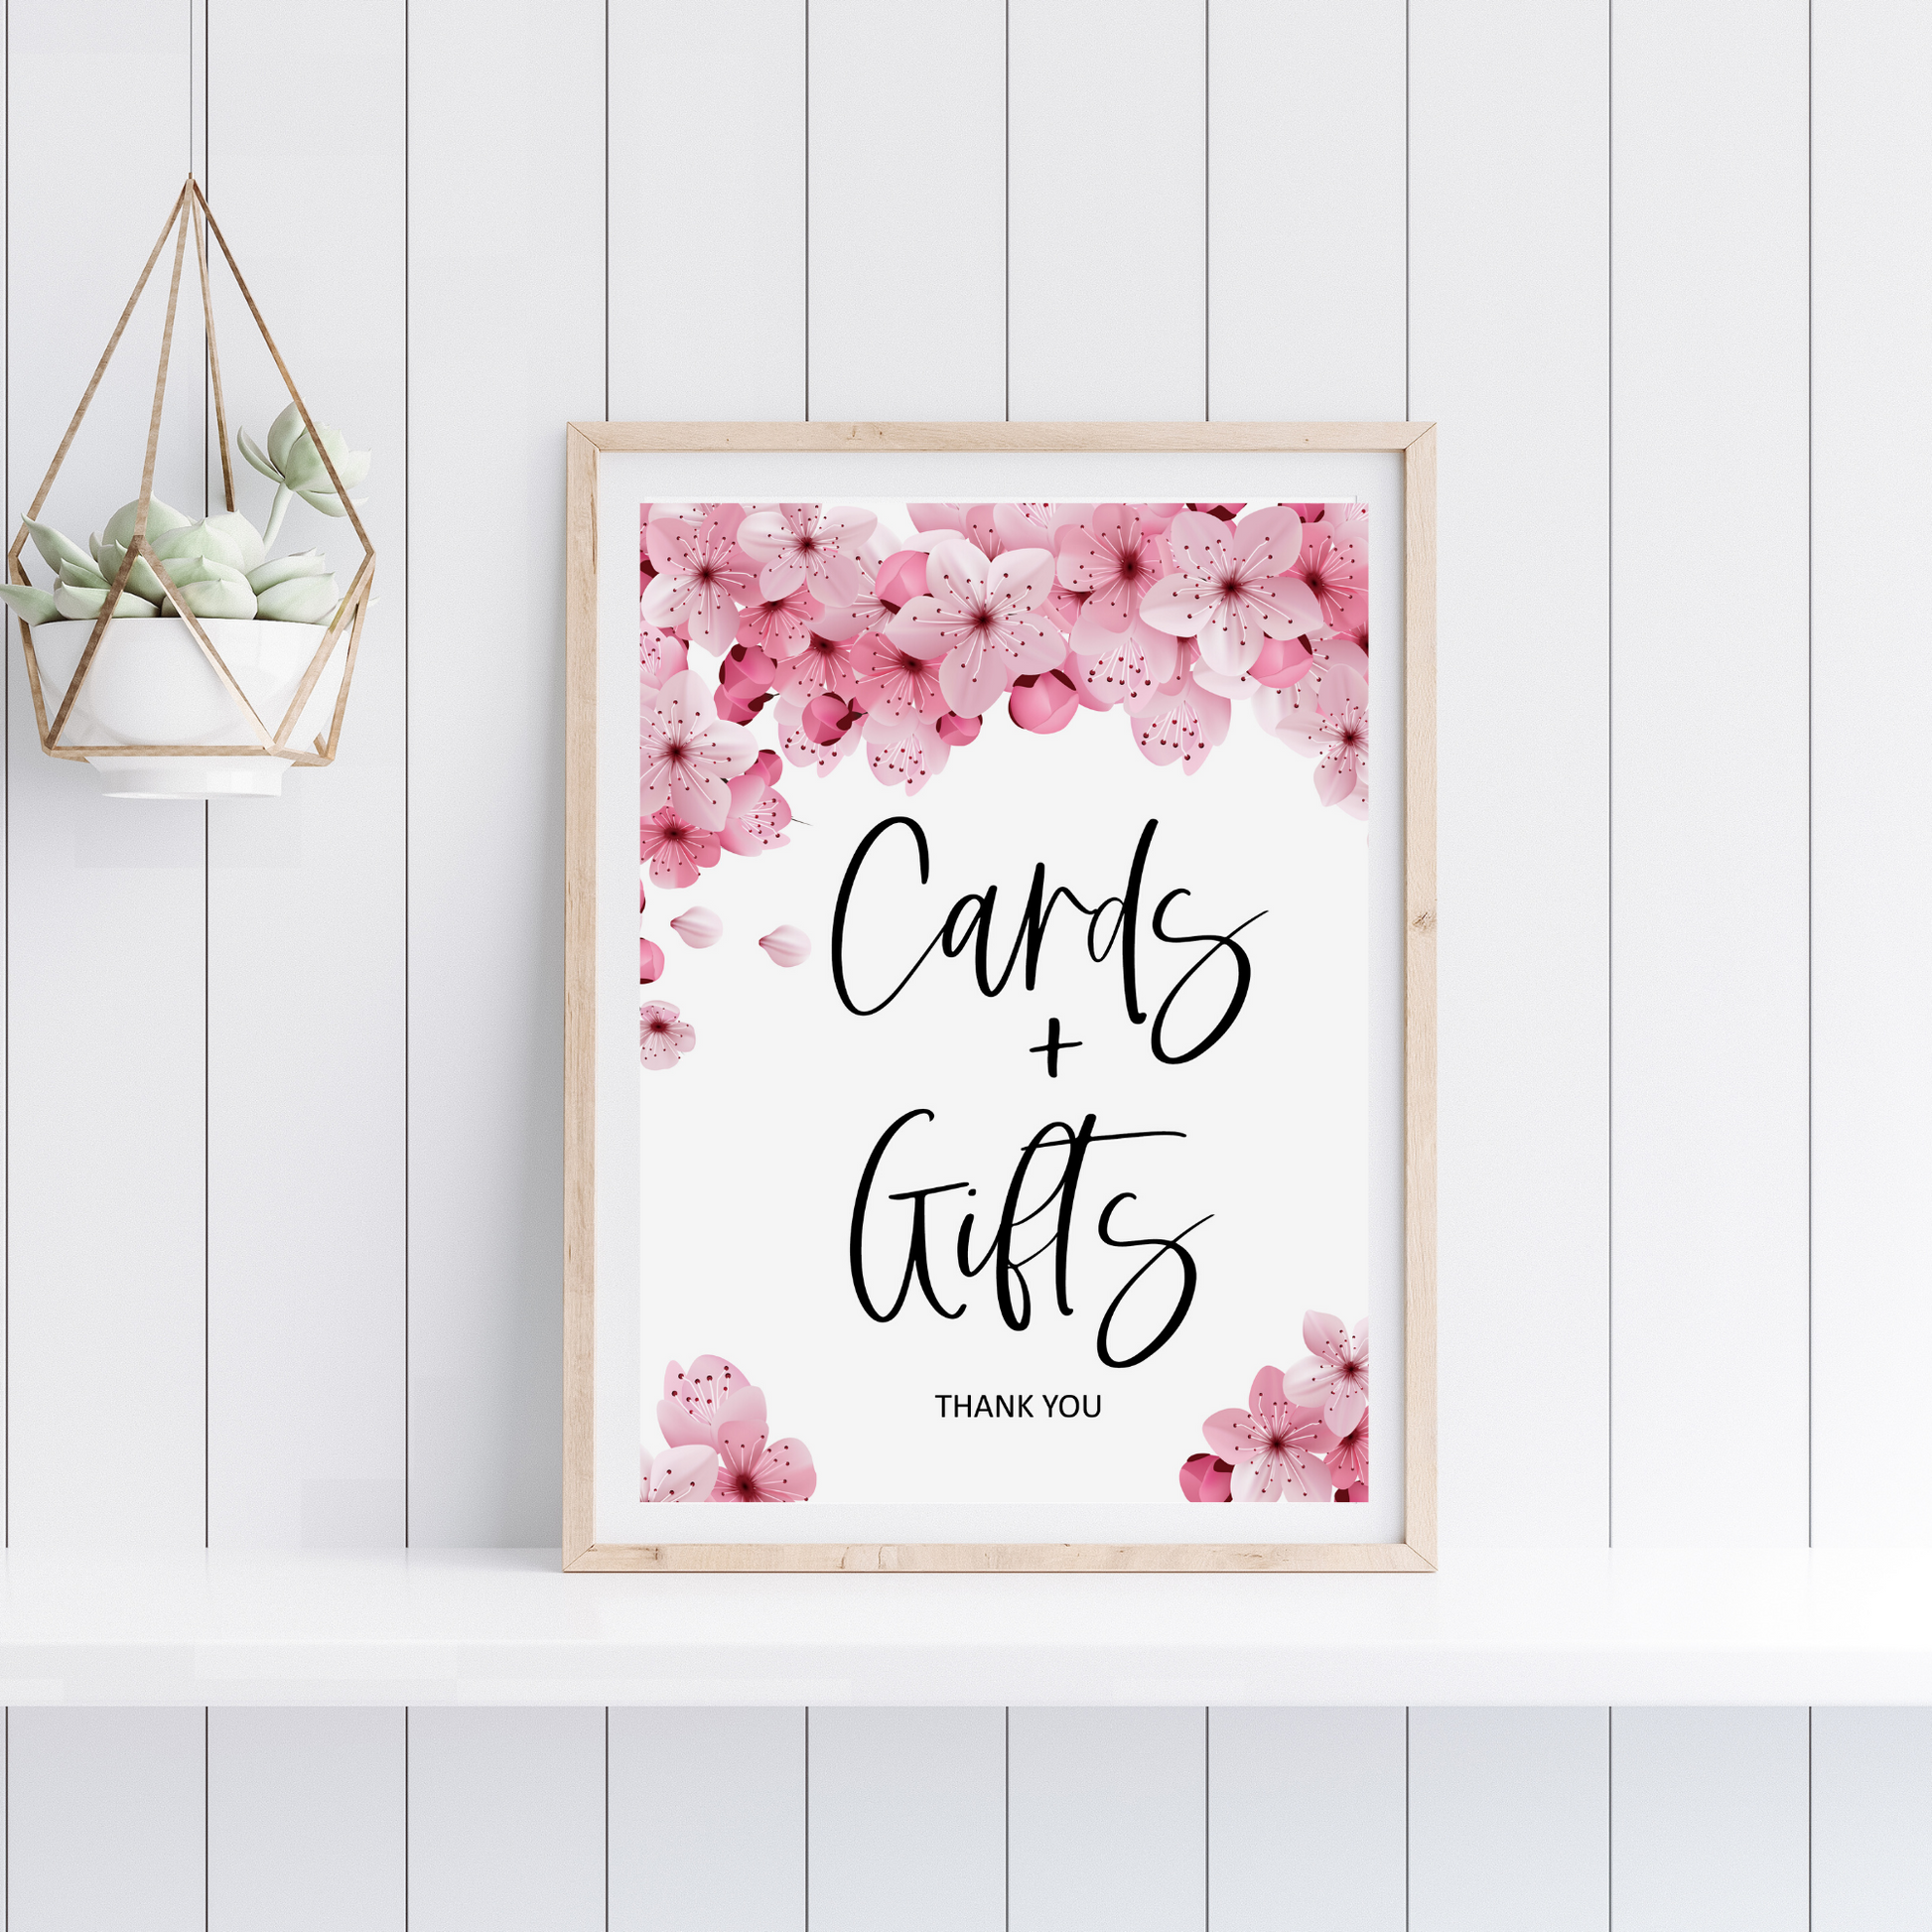 Cards and Gifts Wedding Table Sign - Pink Floral